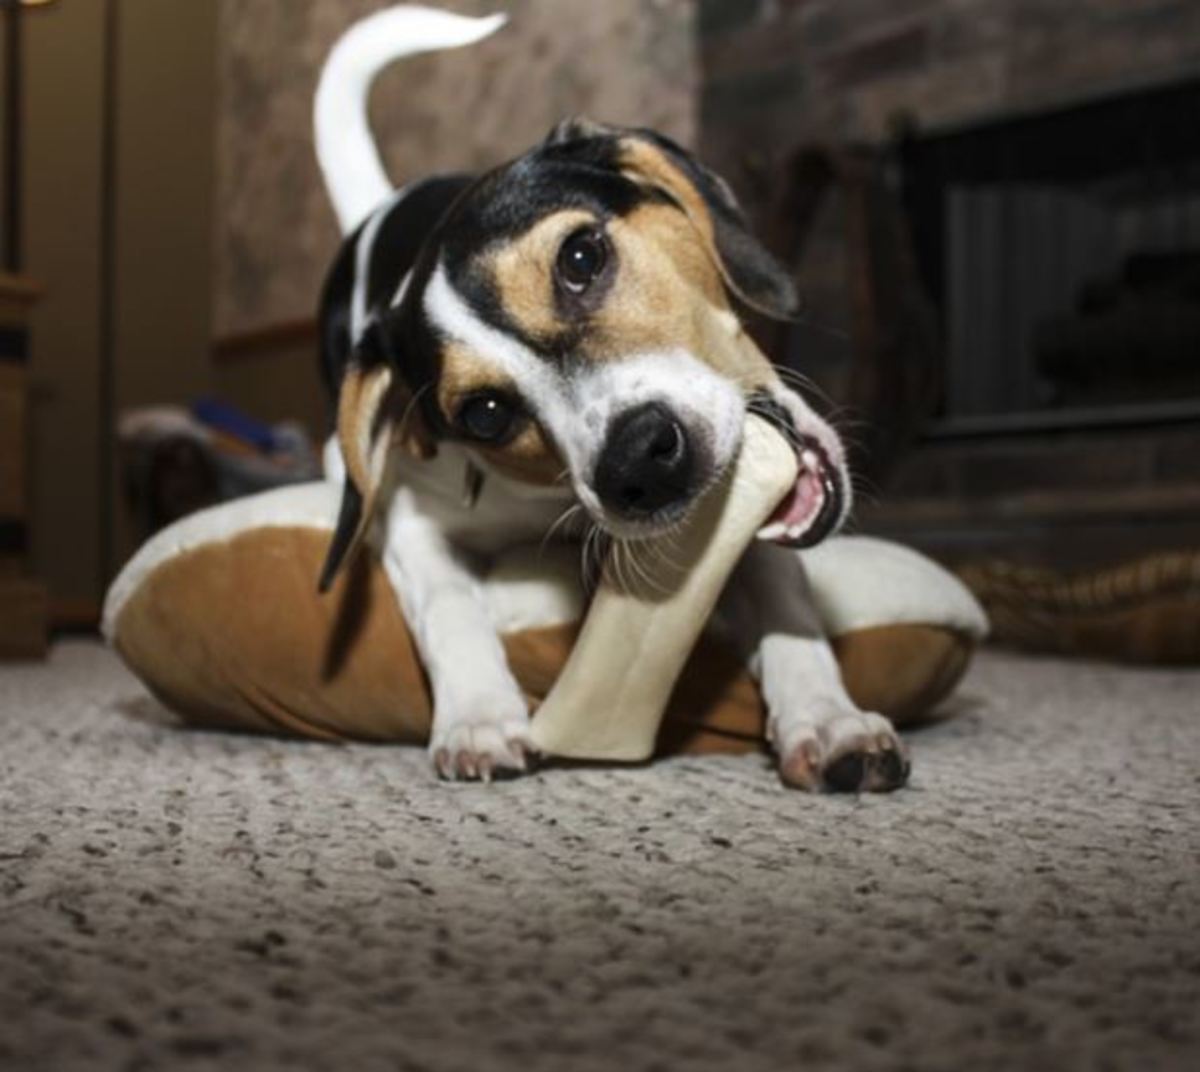 Providing dogs with an enriching environment can help prevent psychological forms of tail-biting.